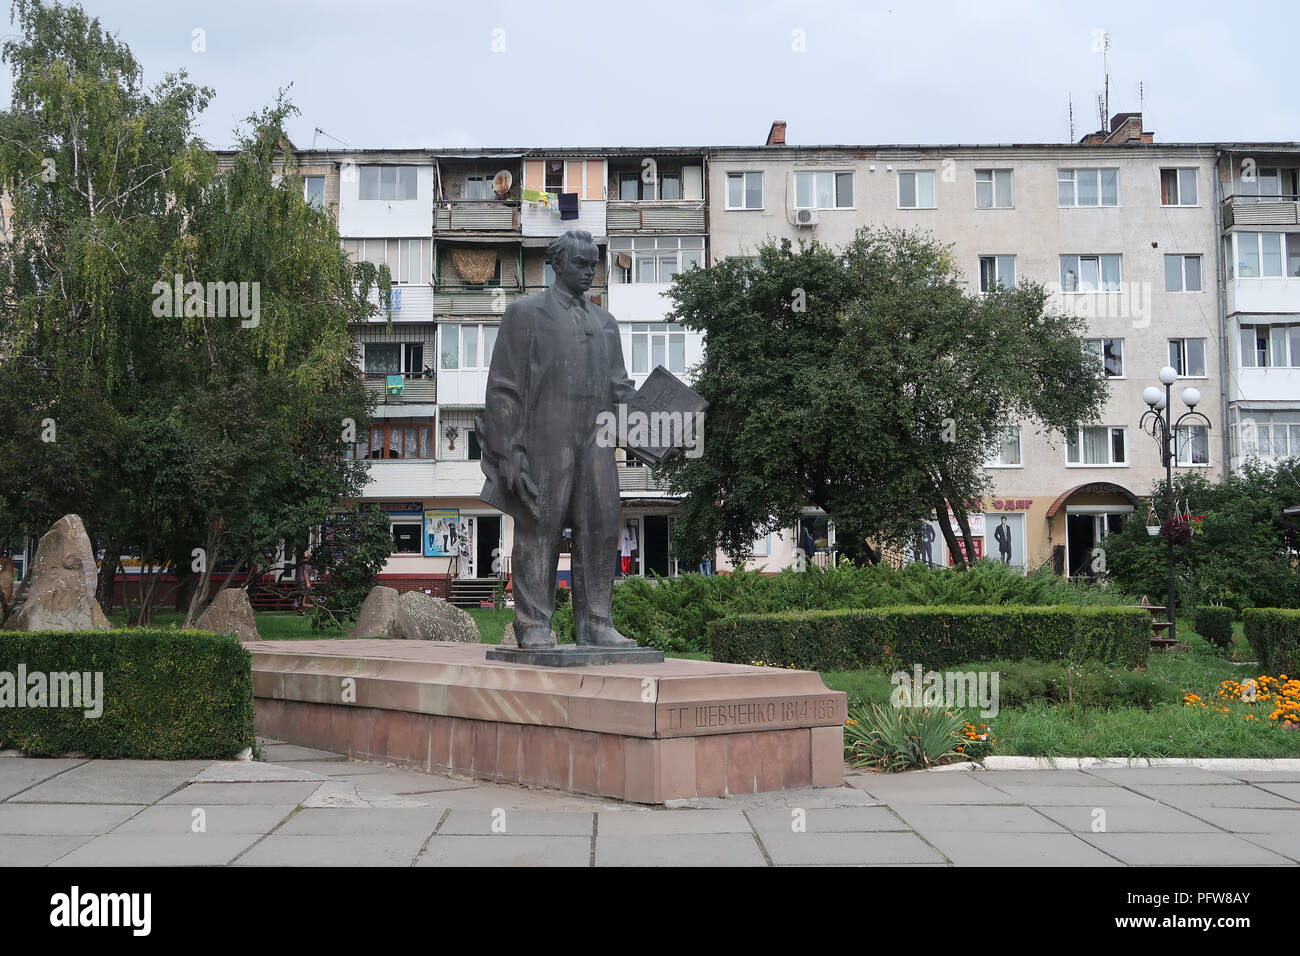 The monument to Taras Shevchenko who was a notable Ukrainian poet and writer in the city of Chortkiv which was once home to a large Jewish community and was annihilated, brutally, by the Germans during the Second World War in Ternopil Oblast (province) in western Ukraine. Stock Photo